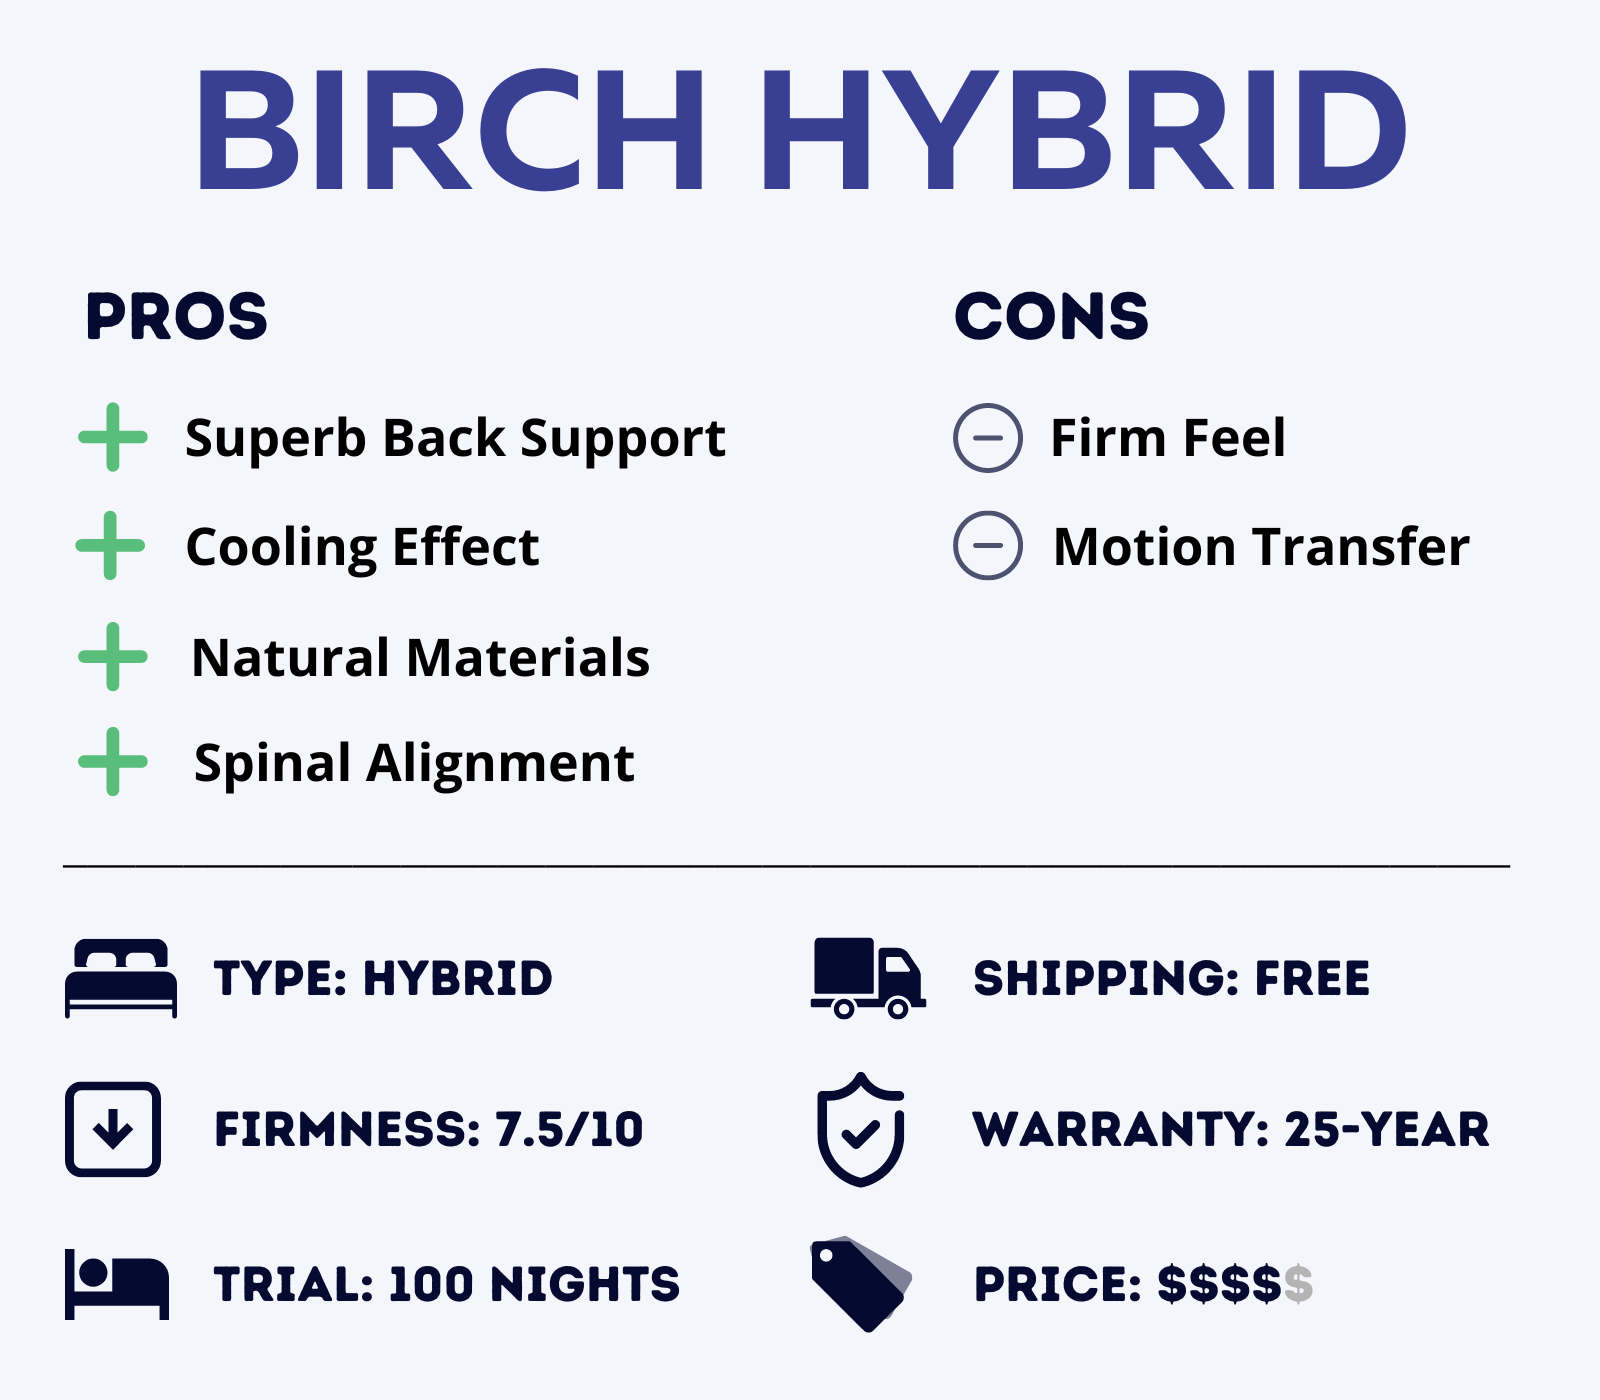 birch latex hybrid mattress overview, pros, and cons